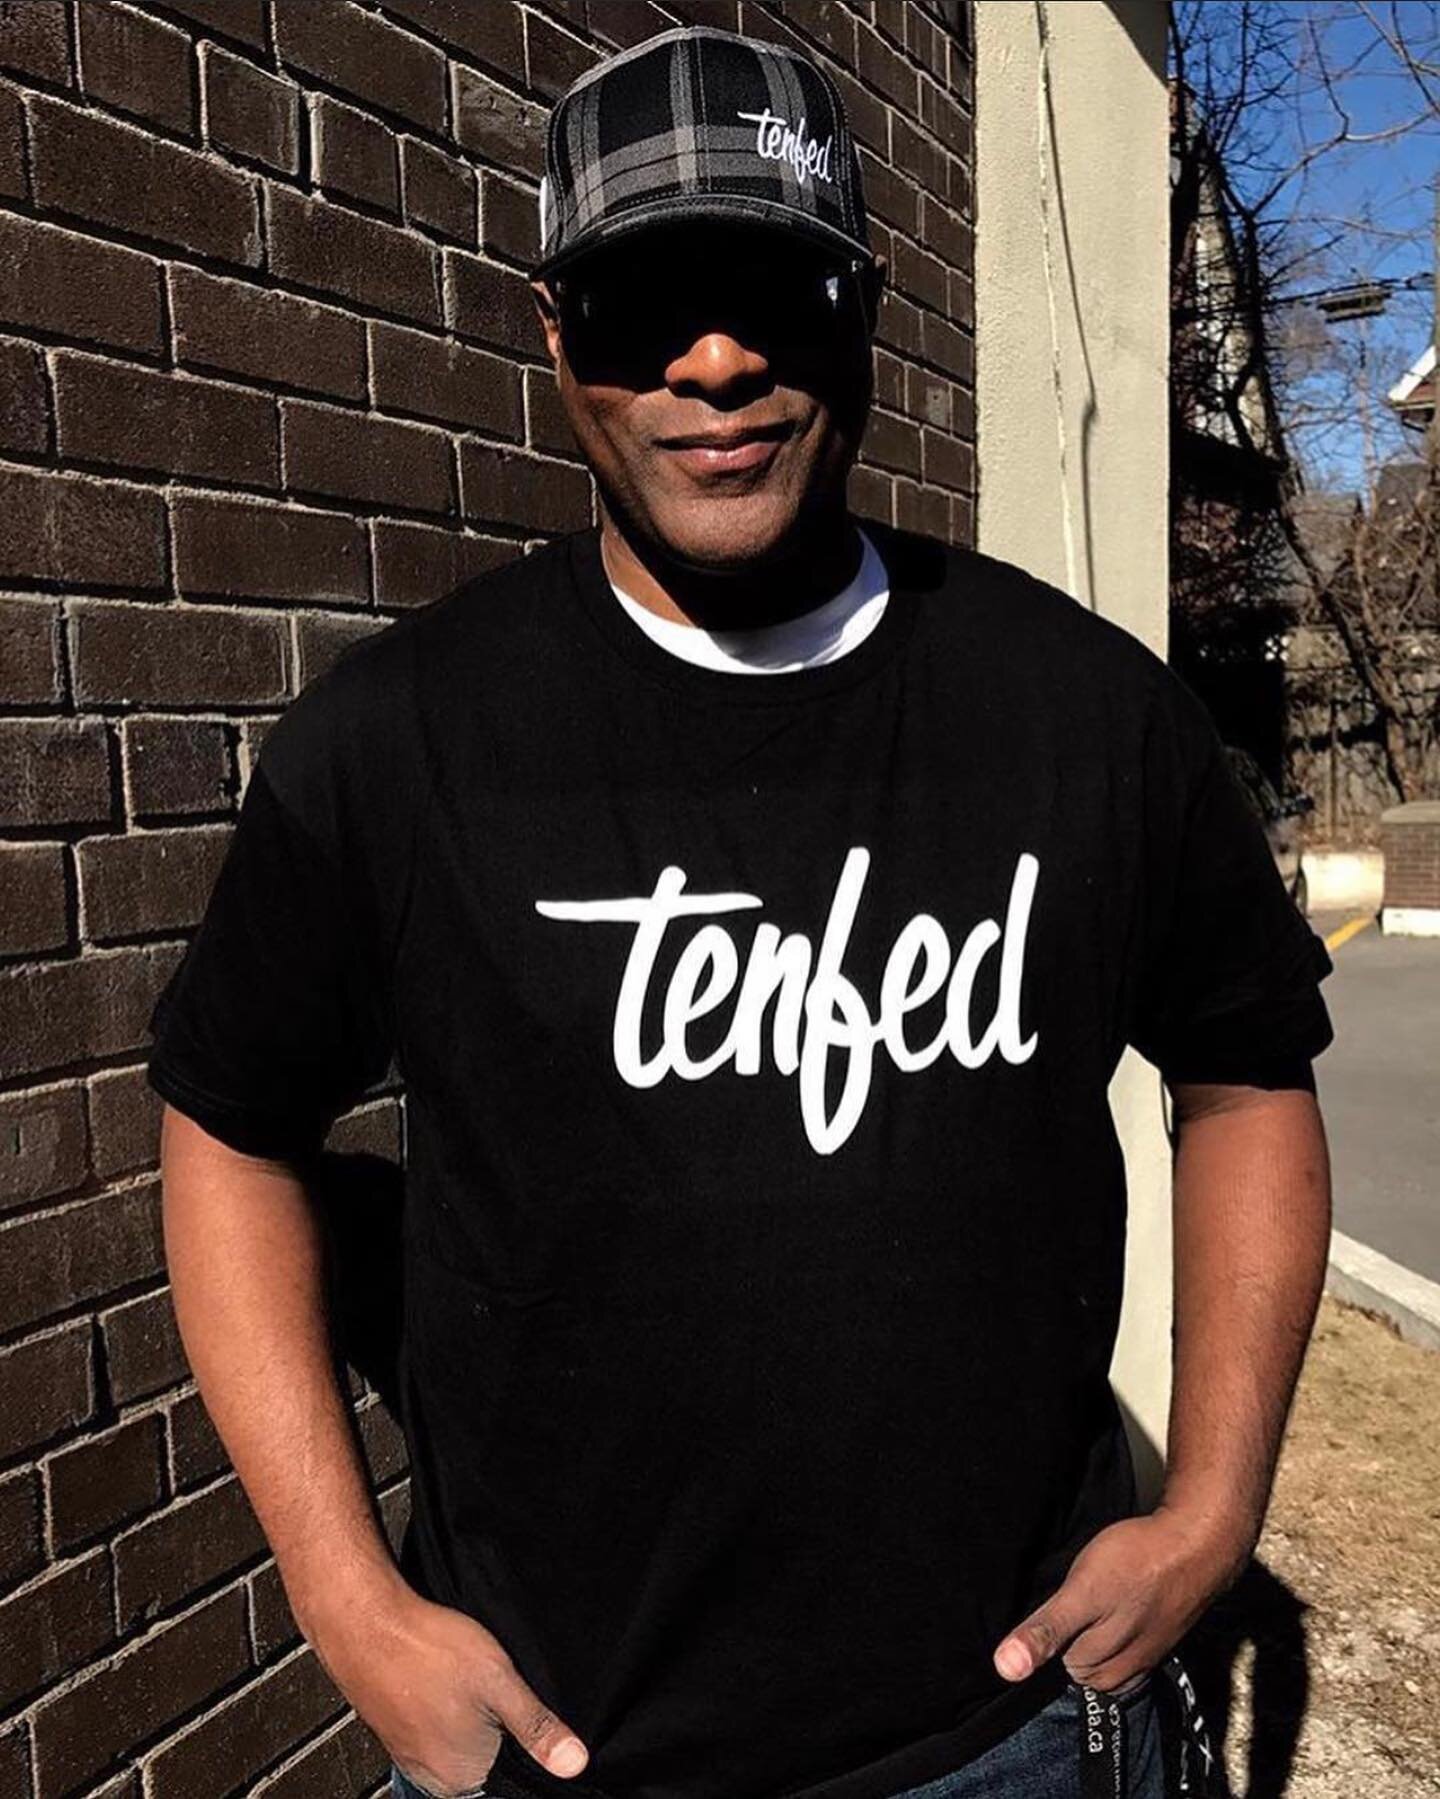 As you can see from my gear, I&rsquo;m a proud @tenfed supporter. Each item purchased feeds 10 hungry children worldwide - 1/3 in #Canada. 
.
.
Props and respects to Tenfed Co-founders, @korytenfed, @miketenfed, and @pinkdreams.inc founder @fityourst